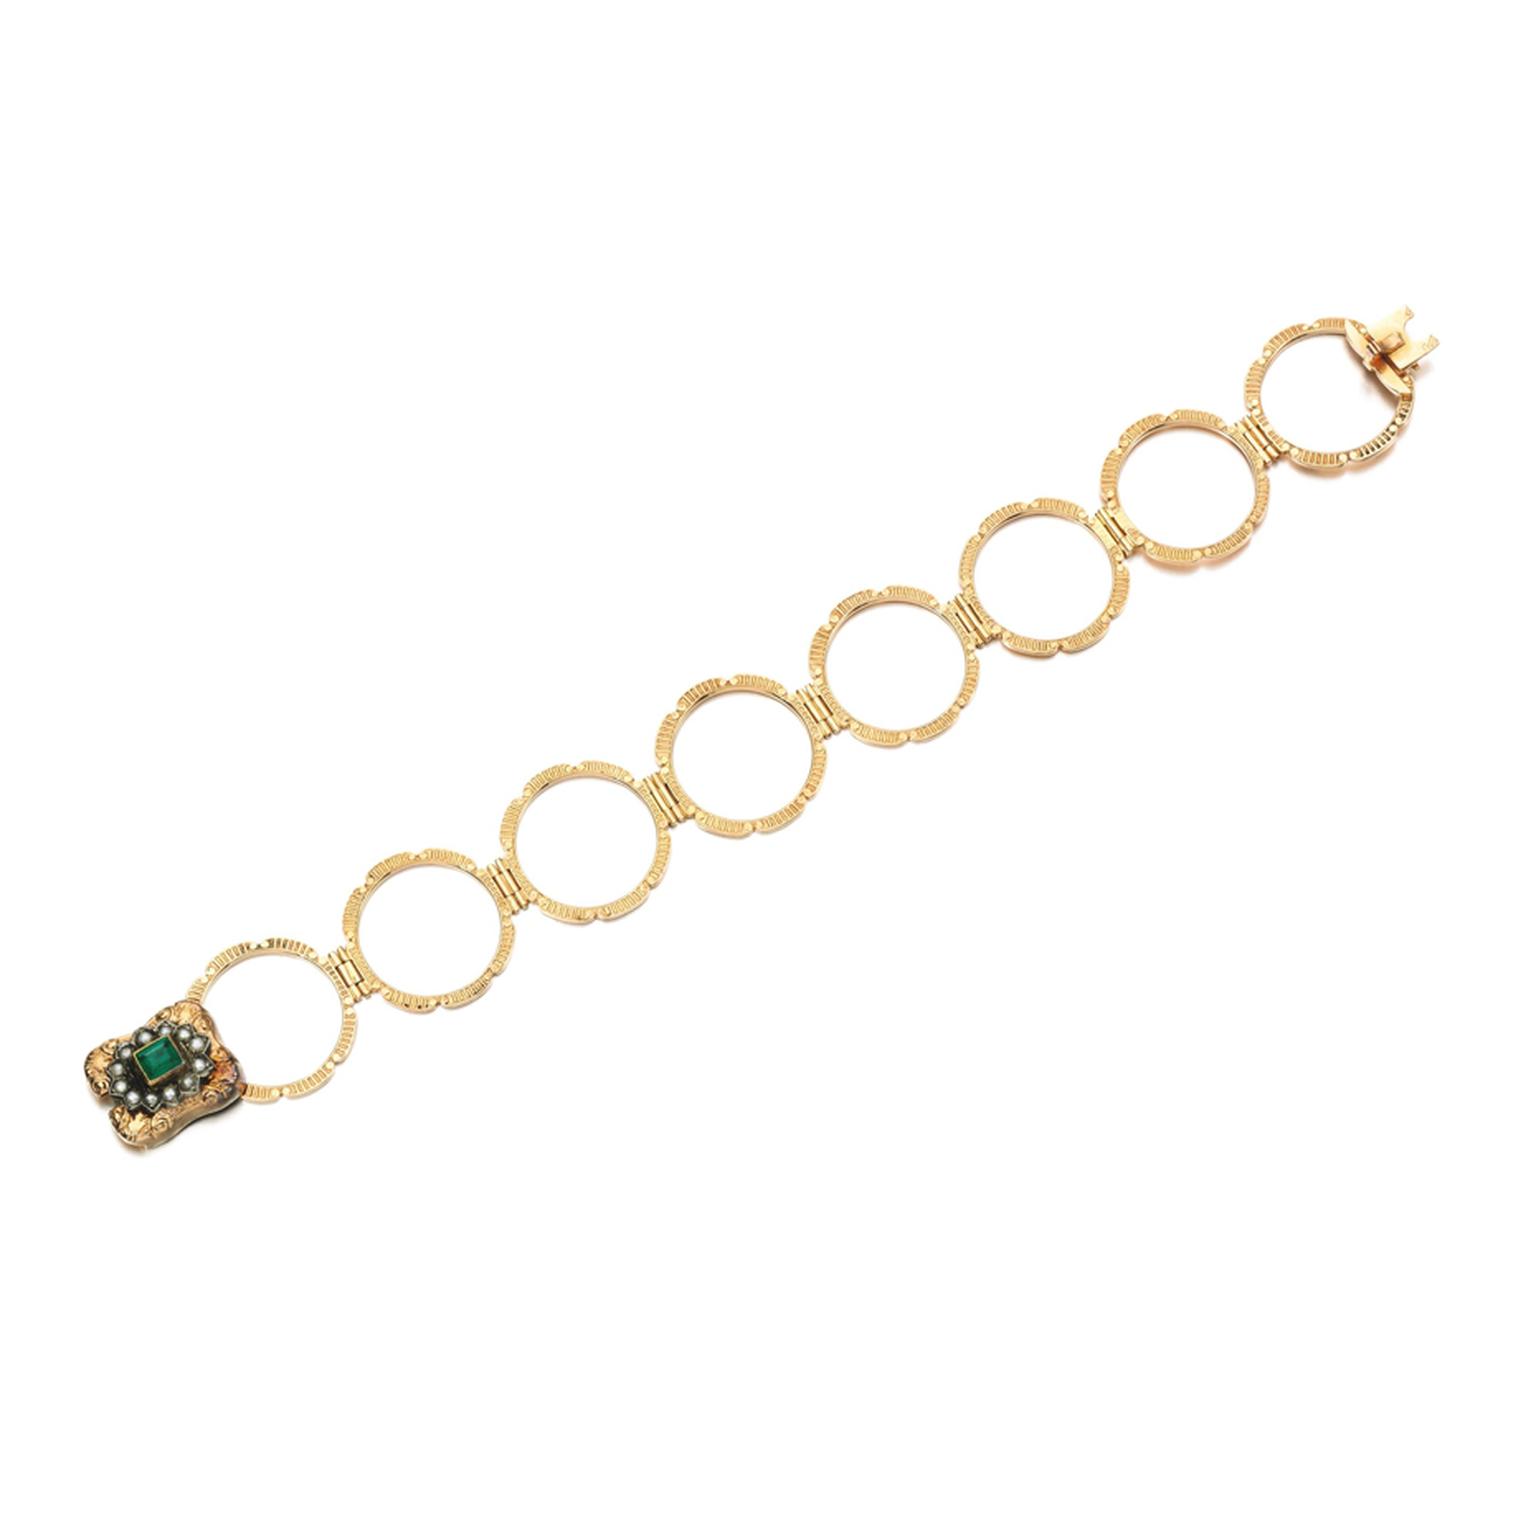 Lot 104, from the Daisy Fellowes collection, a gold, emerald and pearl ring/bracelet (estimate: £3,000-5,000; unsold)